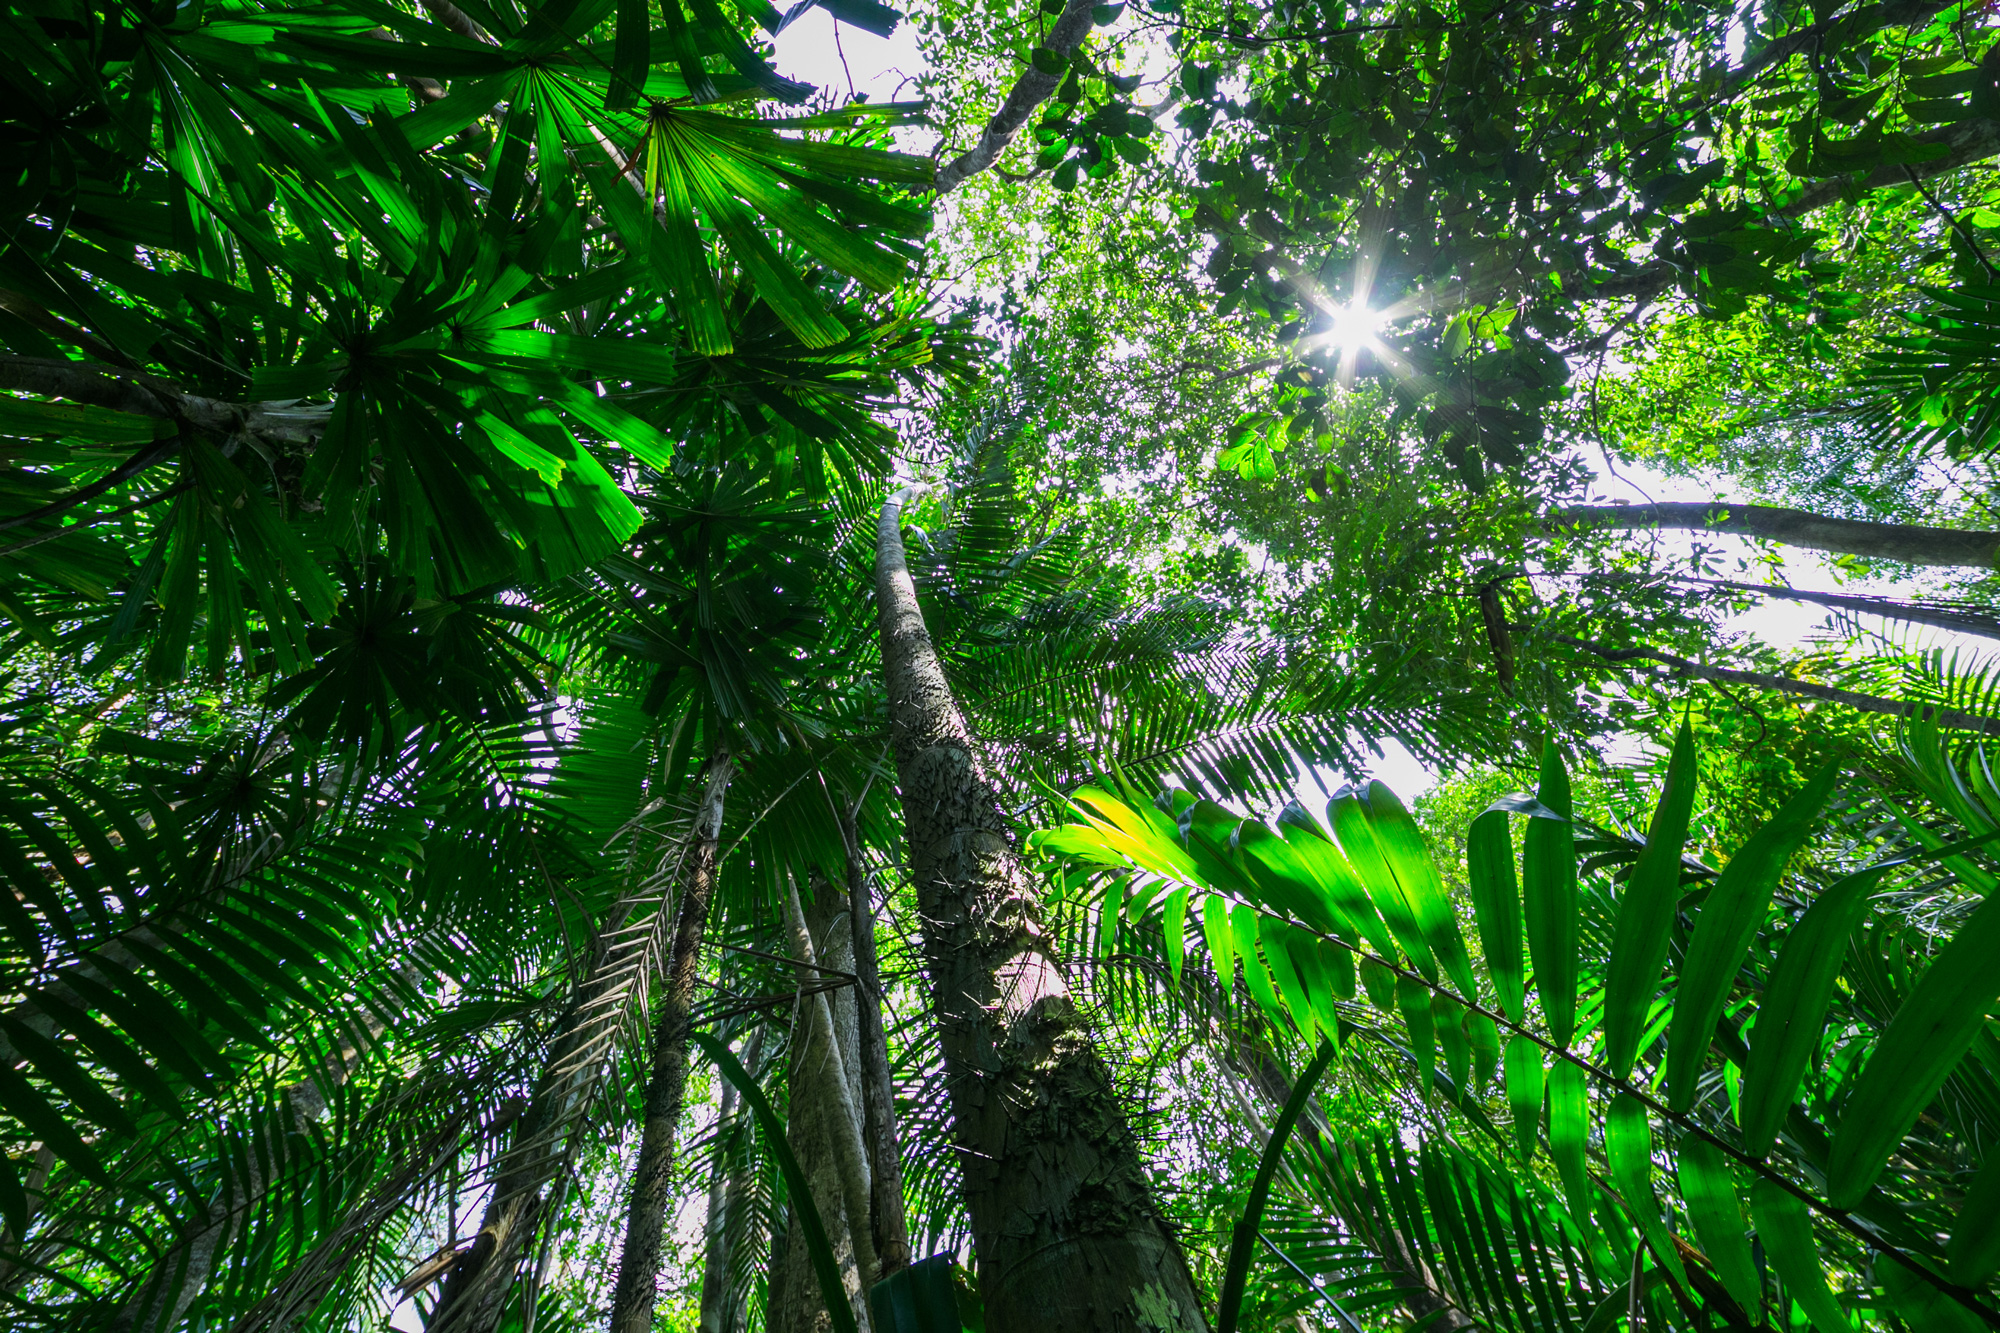 Looking up from the forest floor to a dense green canopy as the sun peeks through